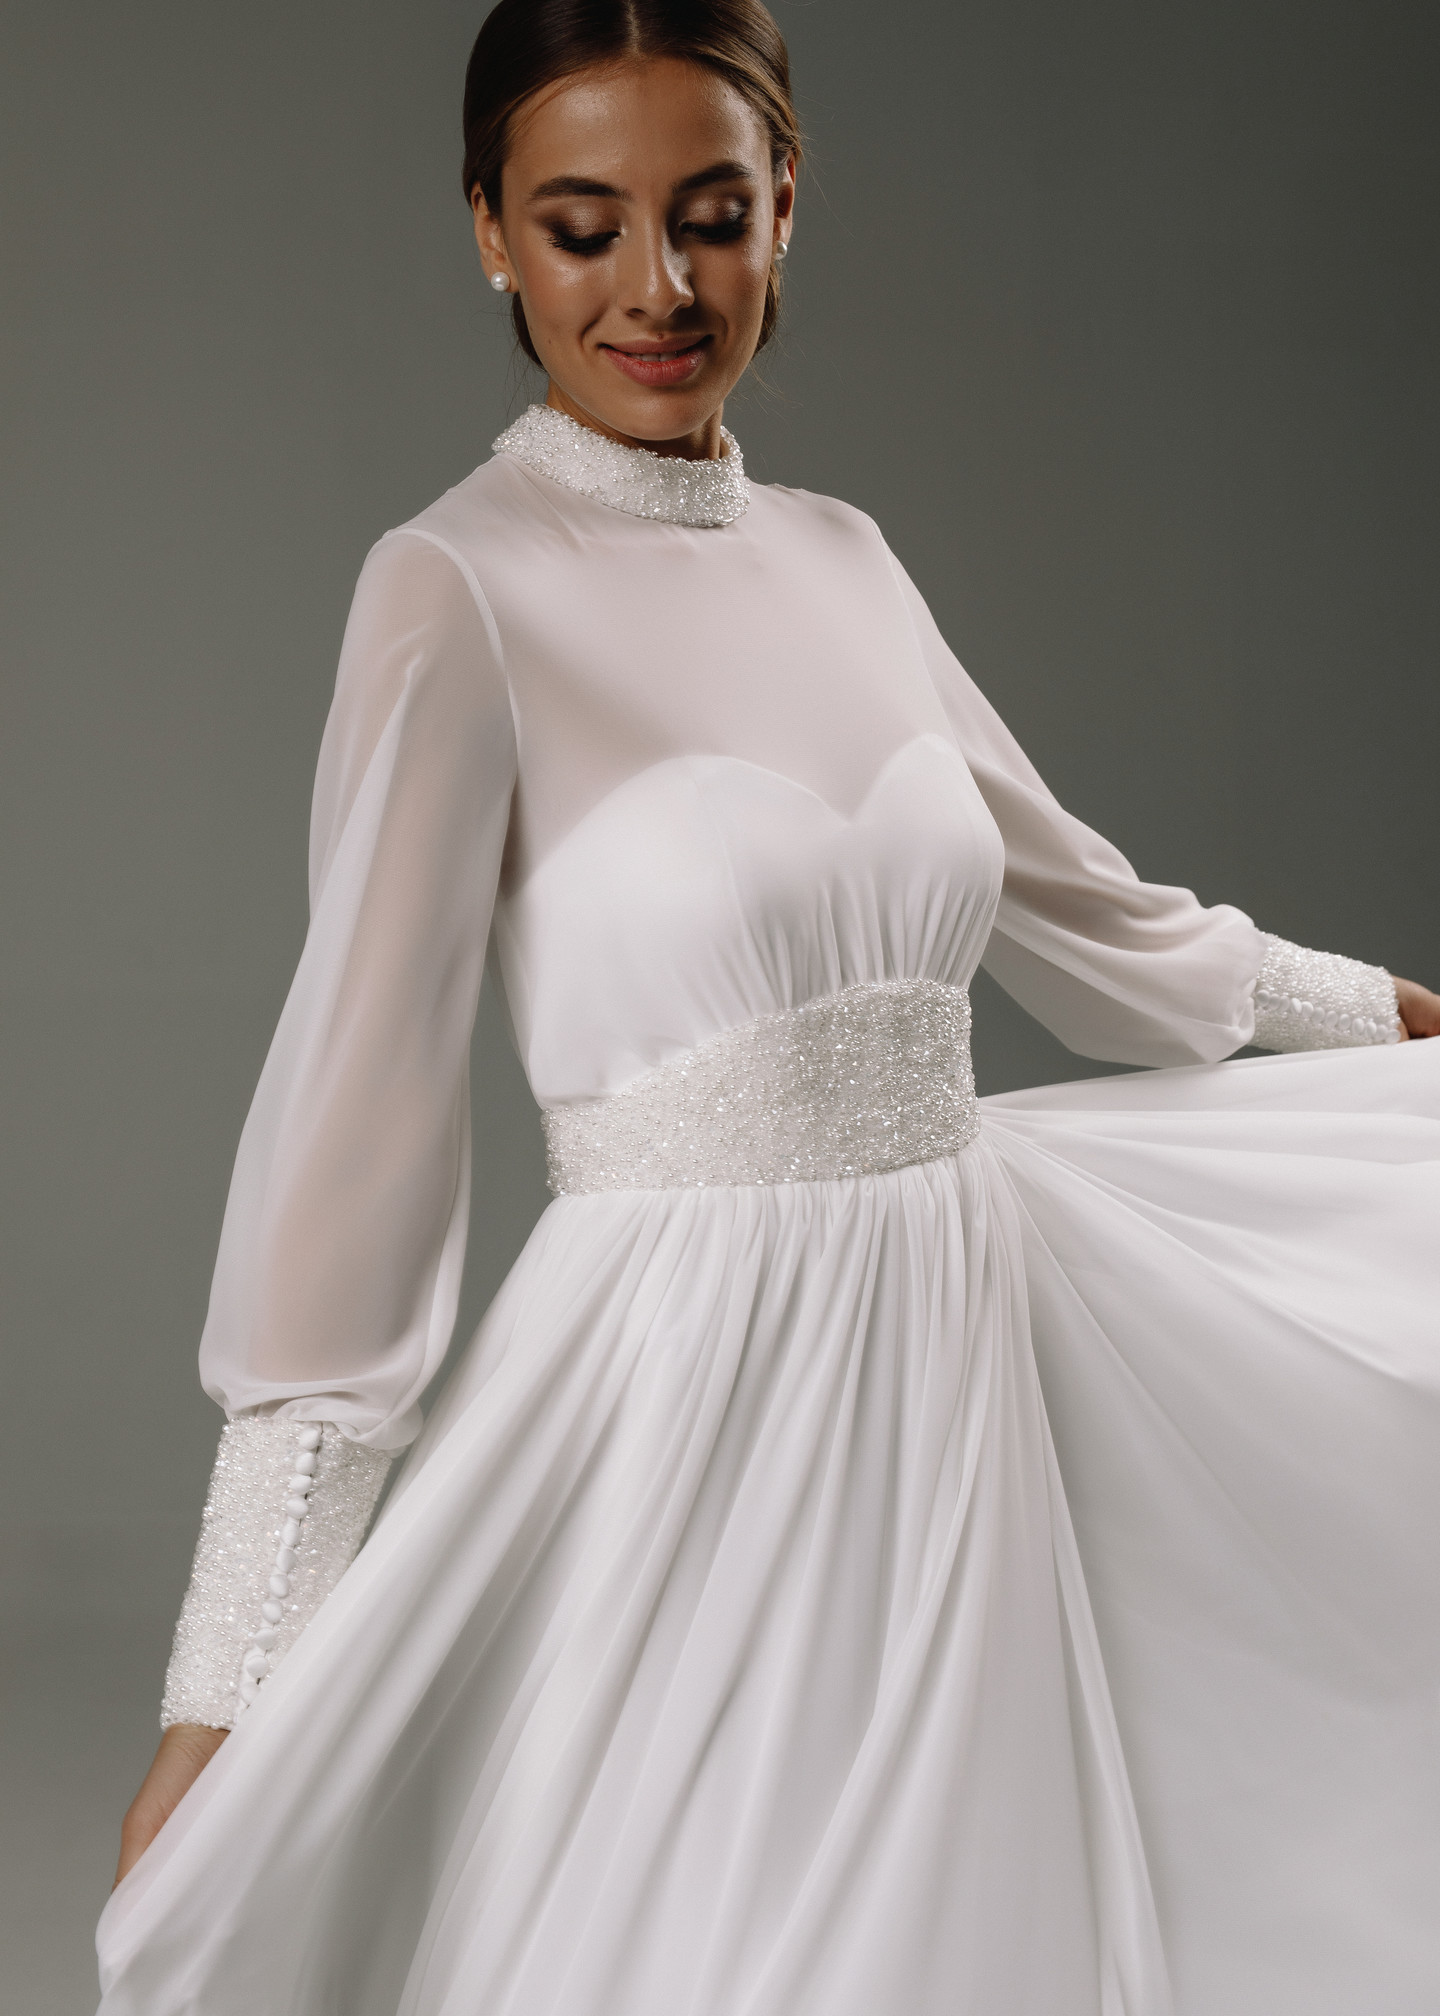 Teona gown, 2020, couture, dress, bridal, off-white, chiffon, embroidery, sleeves, A-line, popular